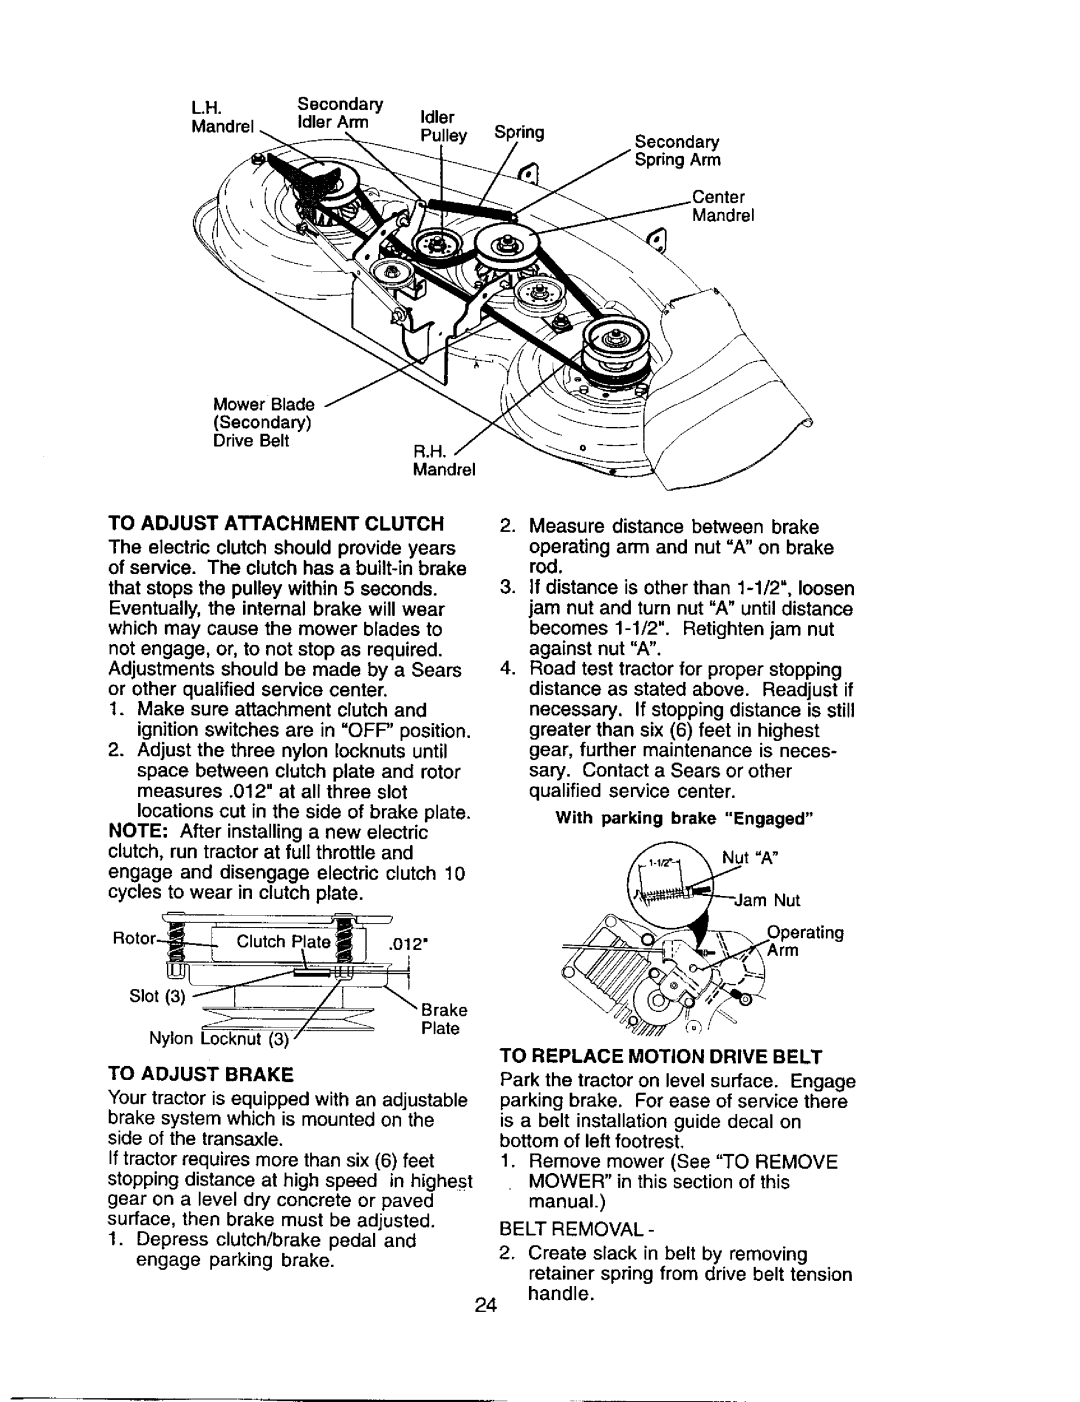 Craftsman 917.27528 owner manual To Adjust Attachment Clutch, To Adjust Brake, To Replace Motion Drive Belt 